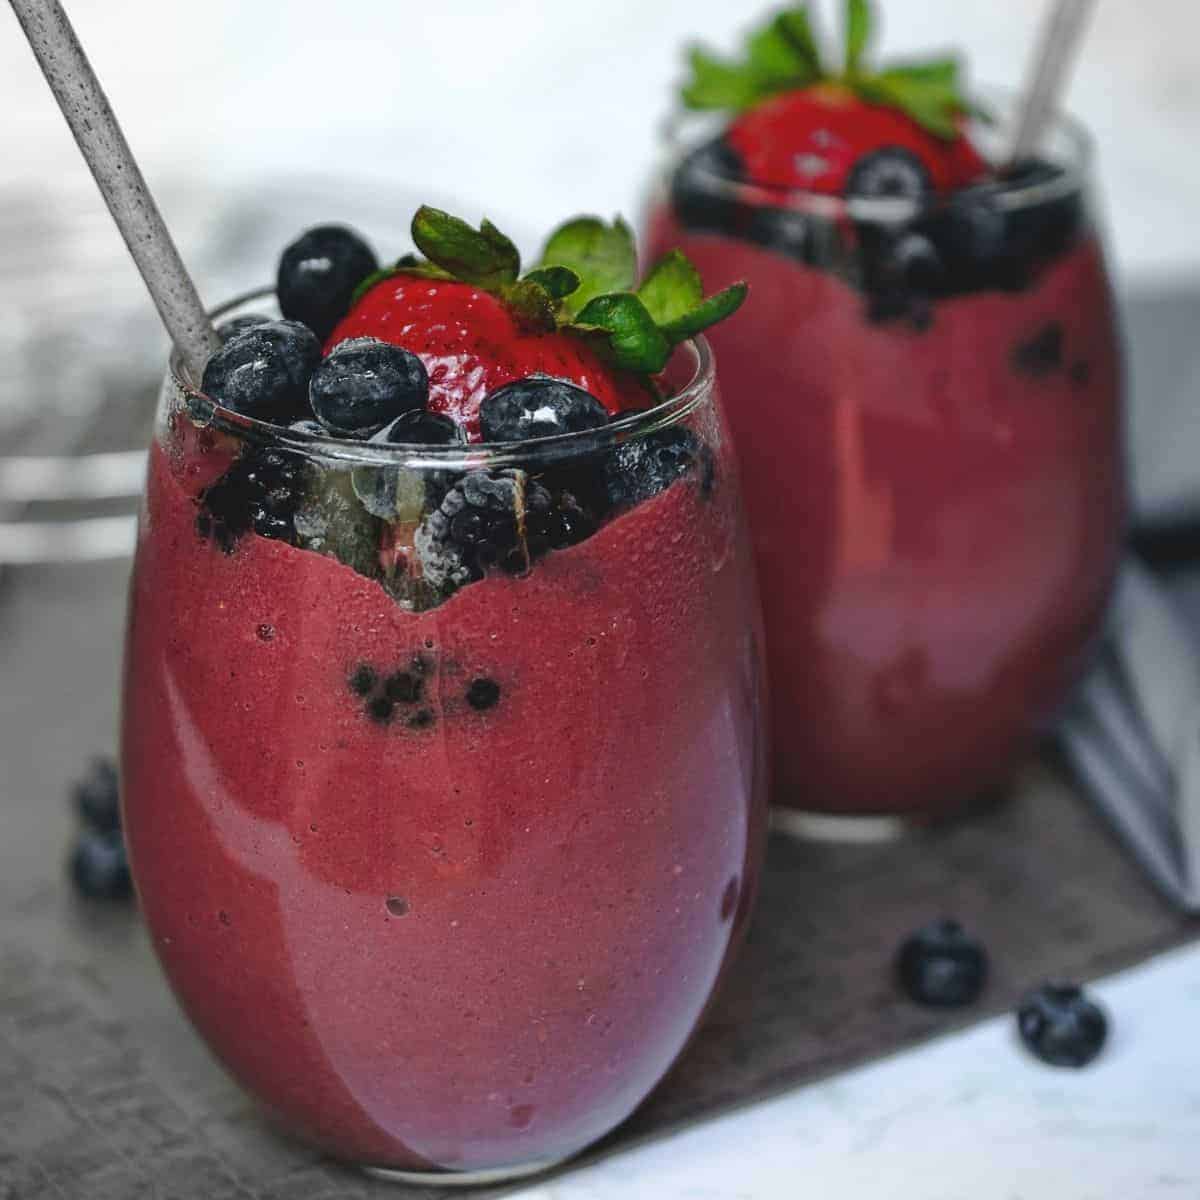 Strawberry, blackberry and blueberry smoothie